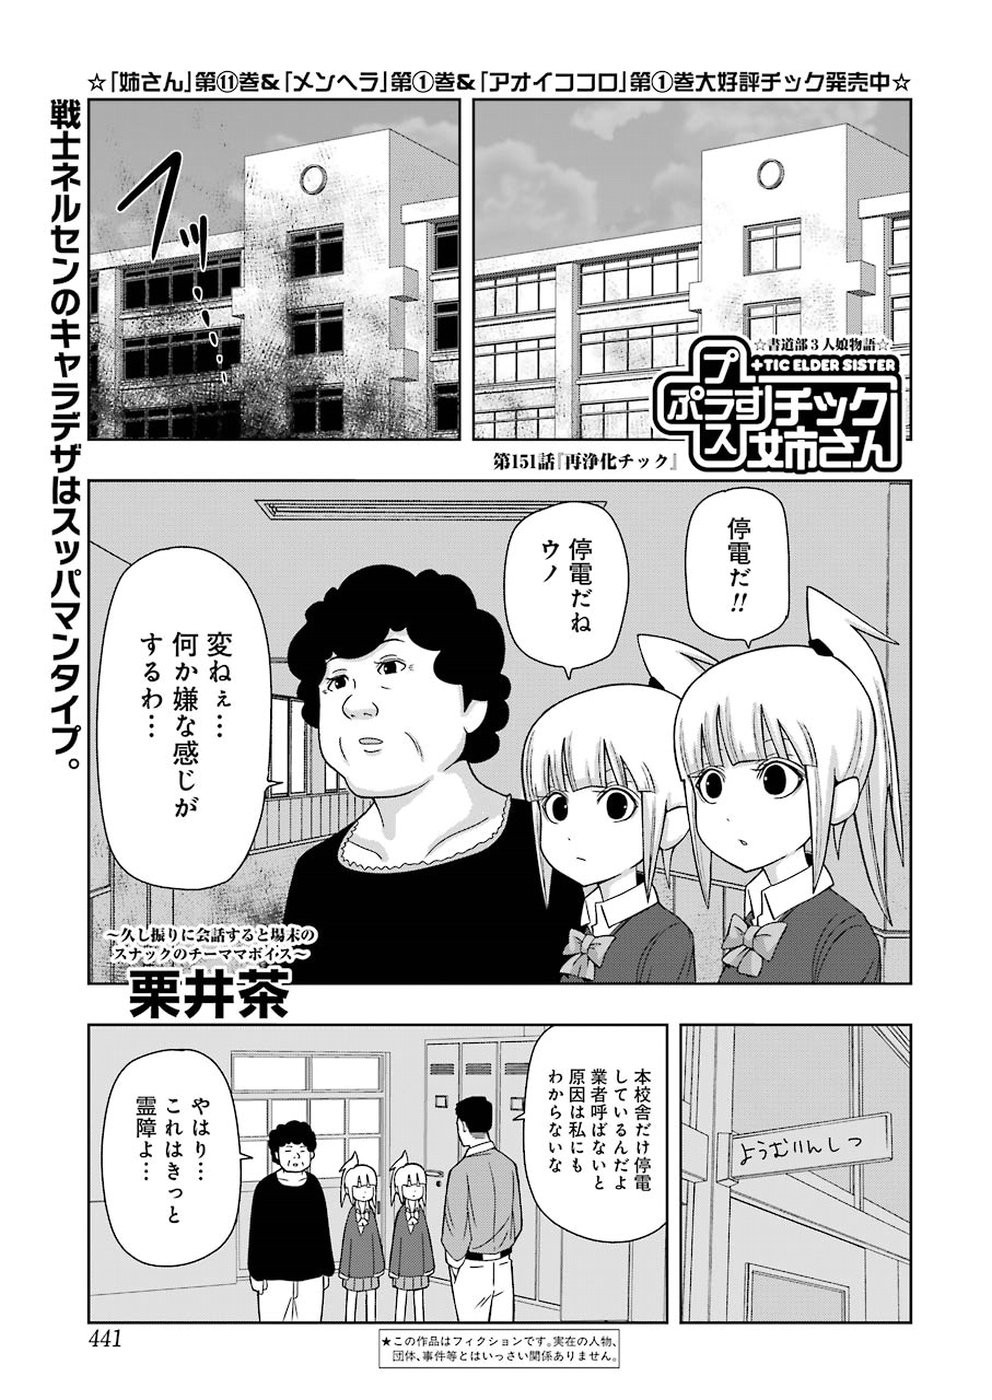 + Tic Nee-san - Chapter 151 - Page 1